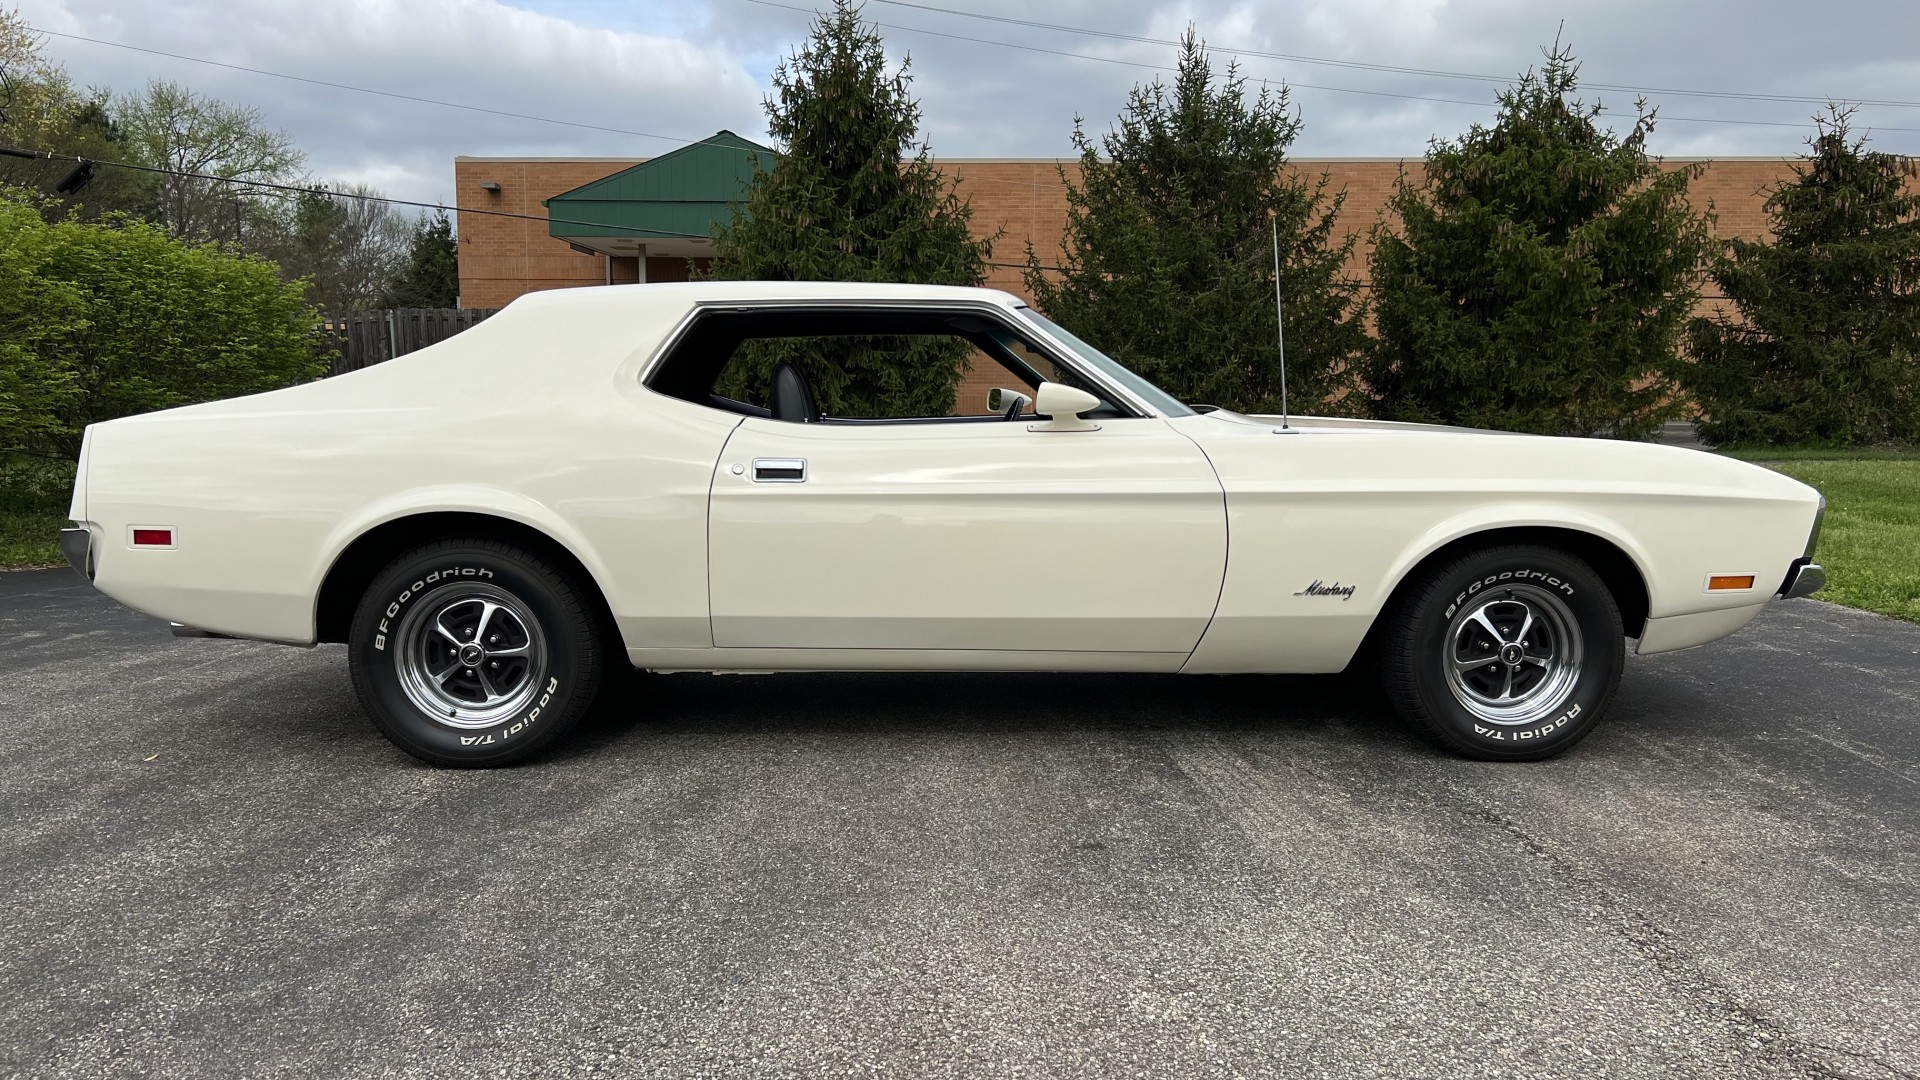 1972 Ford Mustang, 351 Engine, Auto, Restored, SOLD!